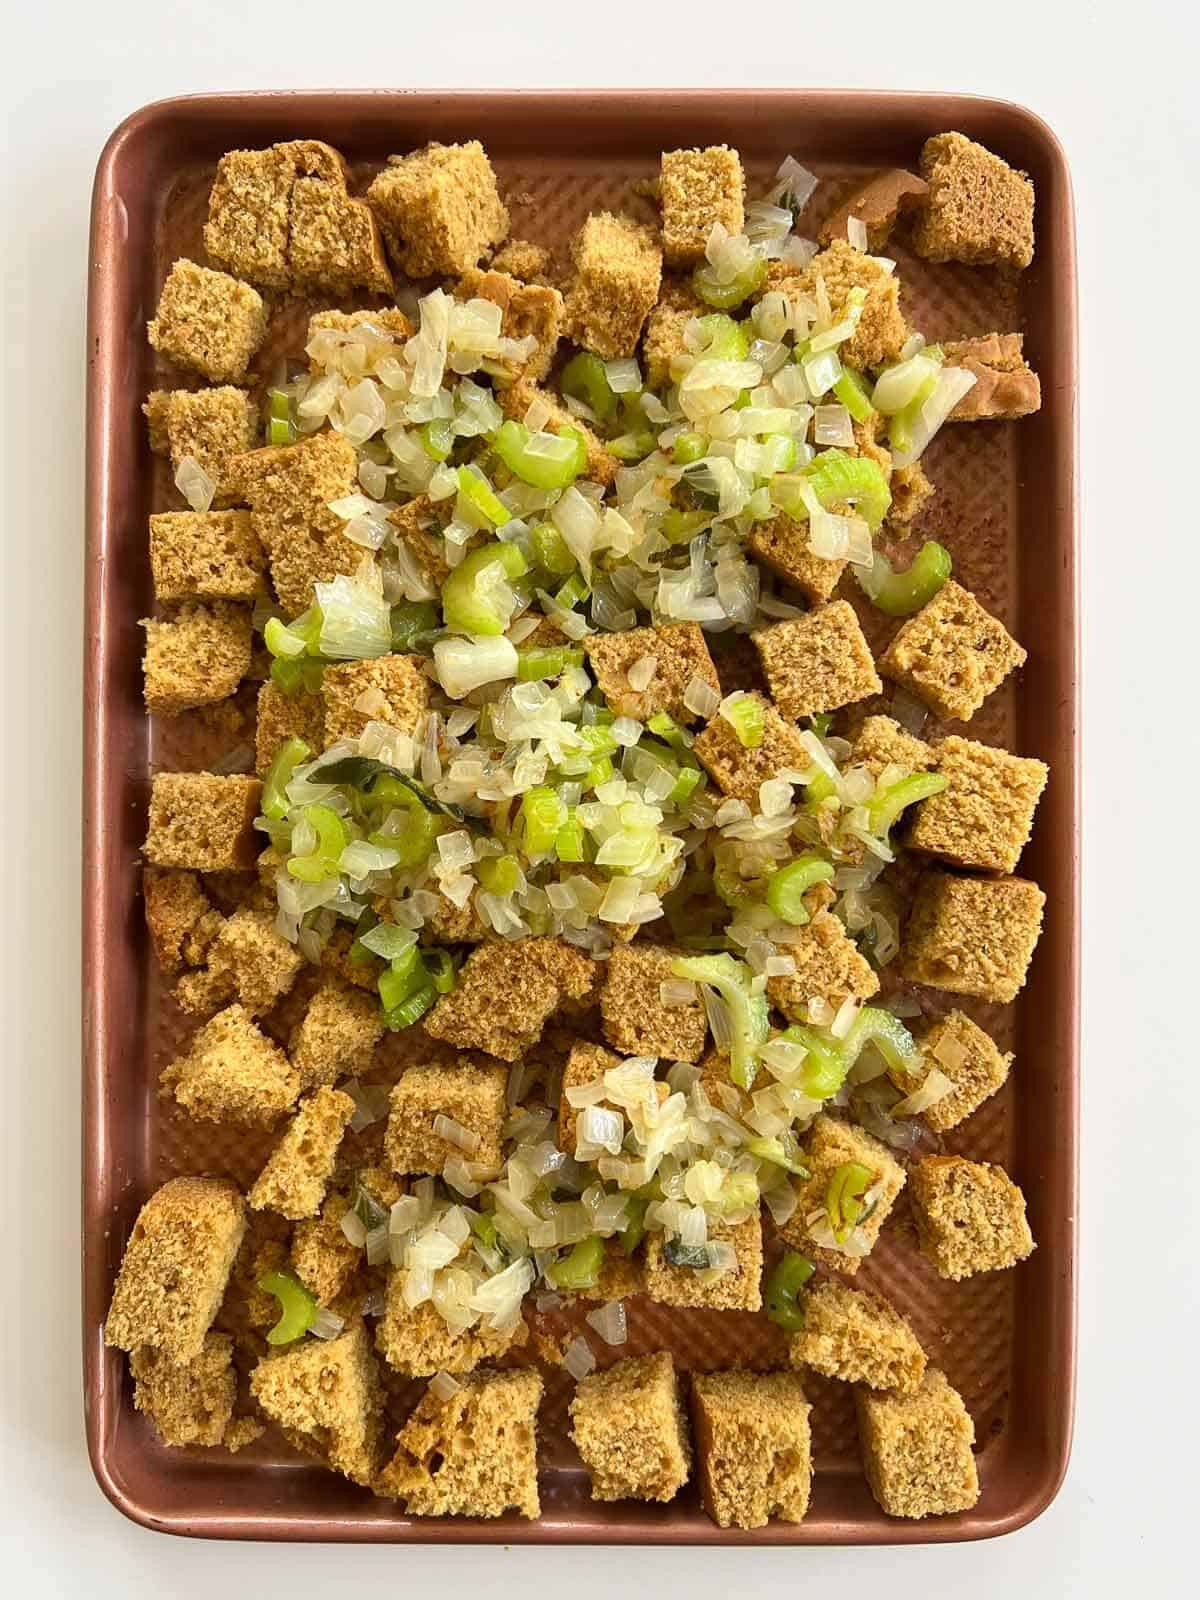 cornbread cubes in baling sheet with cooked onions and celery on top in a baking sheet.